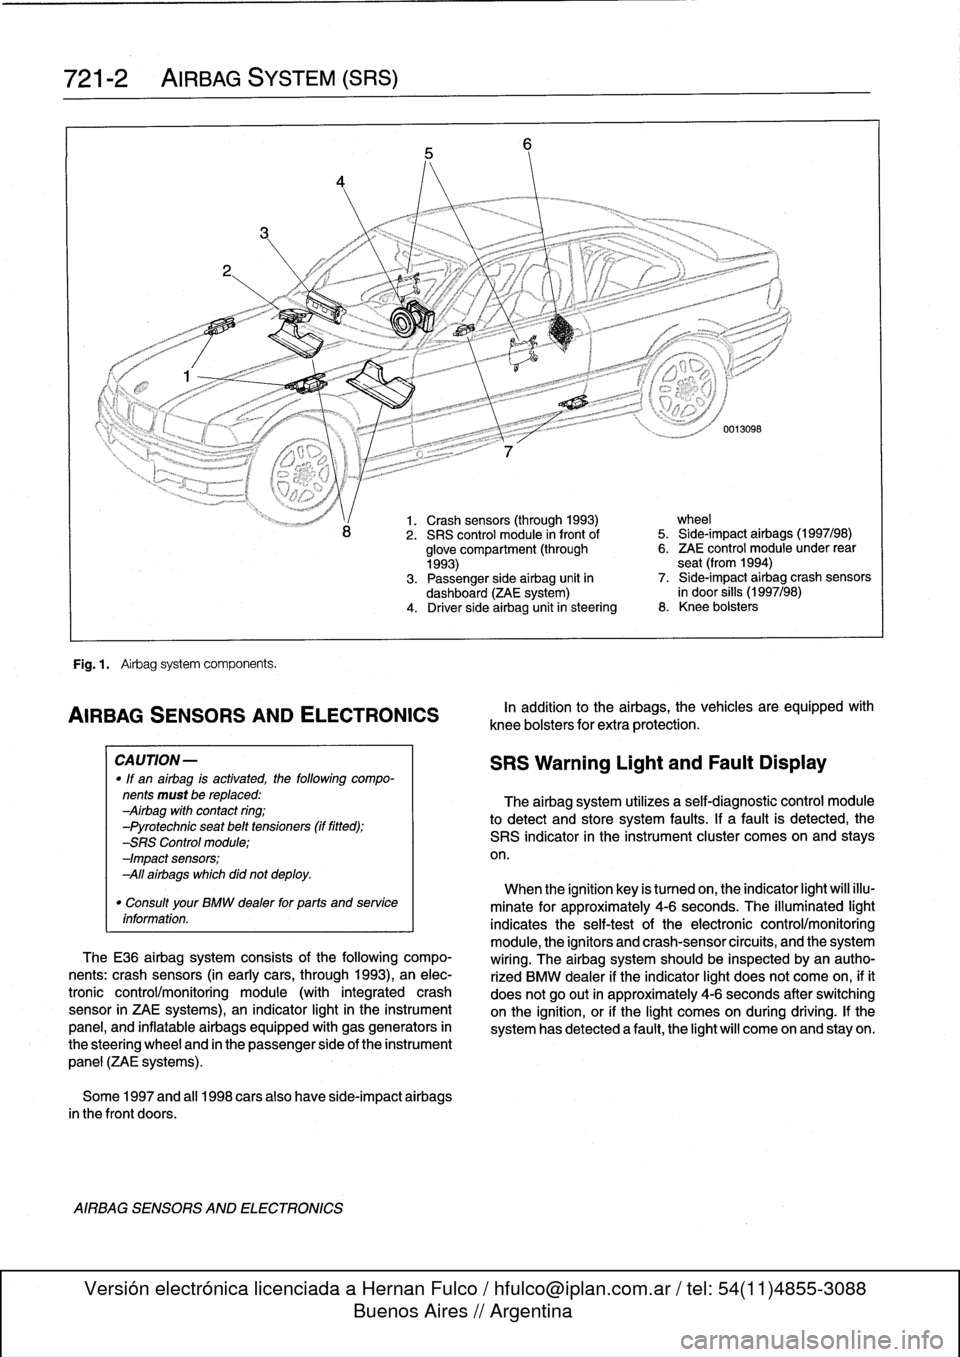 BMW 323i 1993 E36 Service Manual 
721-2

	

AIRBAG
SYSTEM
(SRS)

Fig
.
1
.

	

Airbag
system
components
.

AIRBAG
SENSORSAND
ELECTRONICS

CA
UTION-

"
If
an
airbag
is
activated,
the
following
compo-
nents
must
be
replaced
:
Airbag
wi